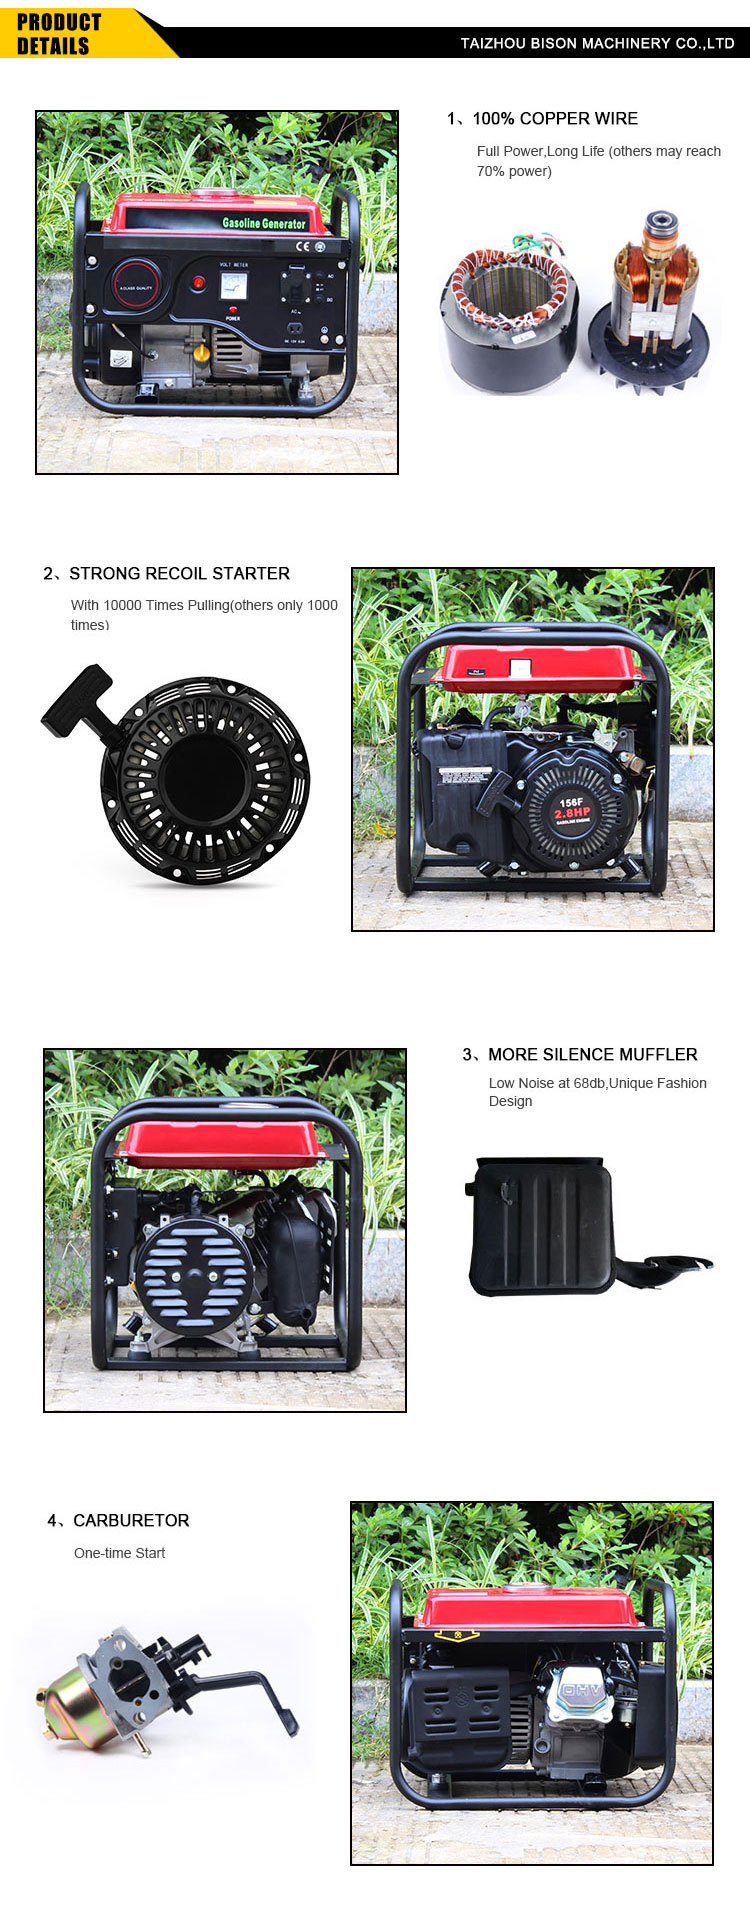 BISON CHINA 1000 watt Electric Portable Generator OHV Air Cooled Gasoline Engine 1 kw Generator Price in India